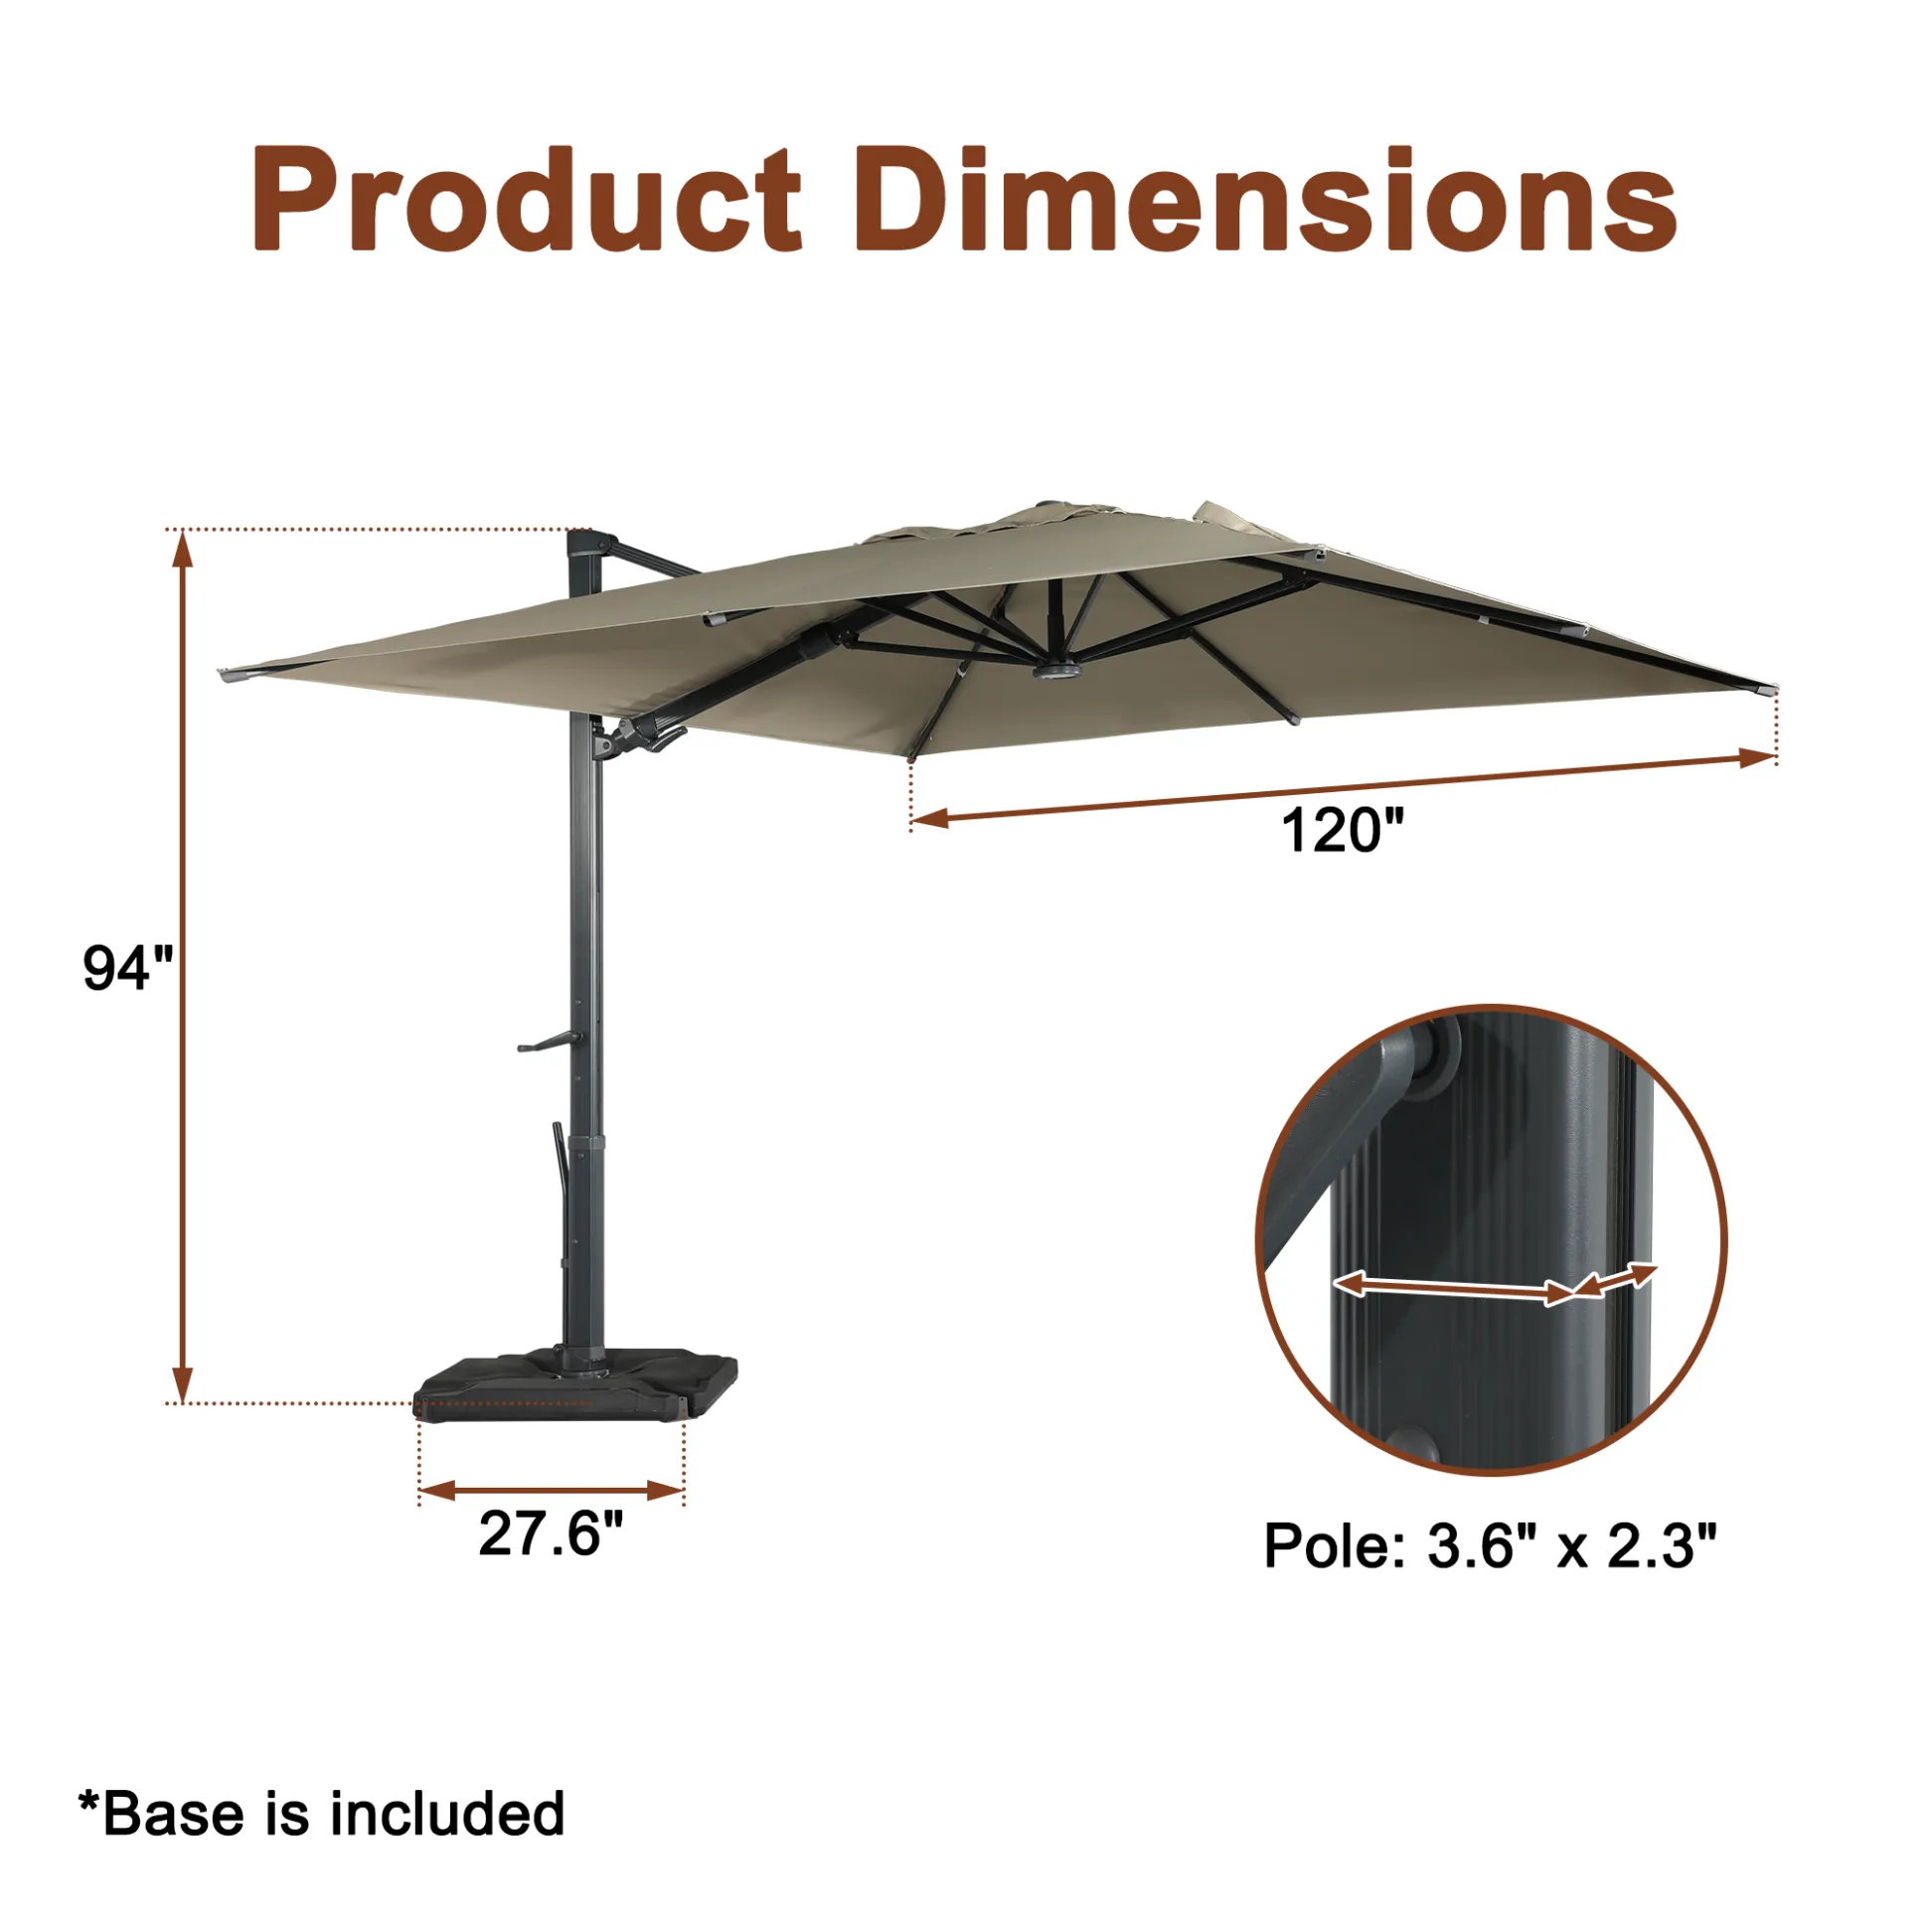 cantilever umbrella with expanded shade coverage